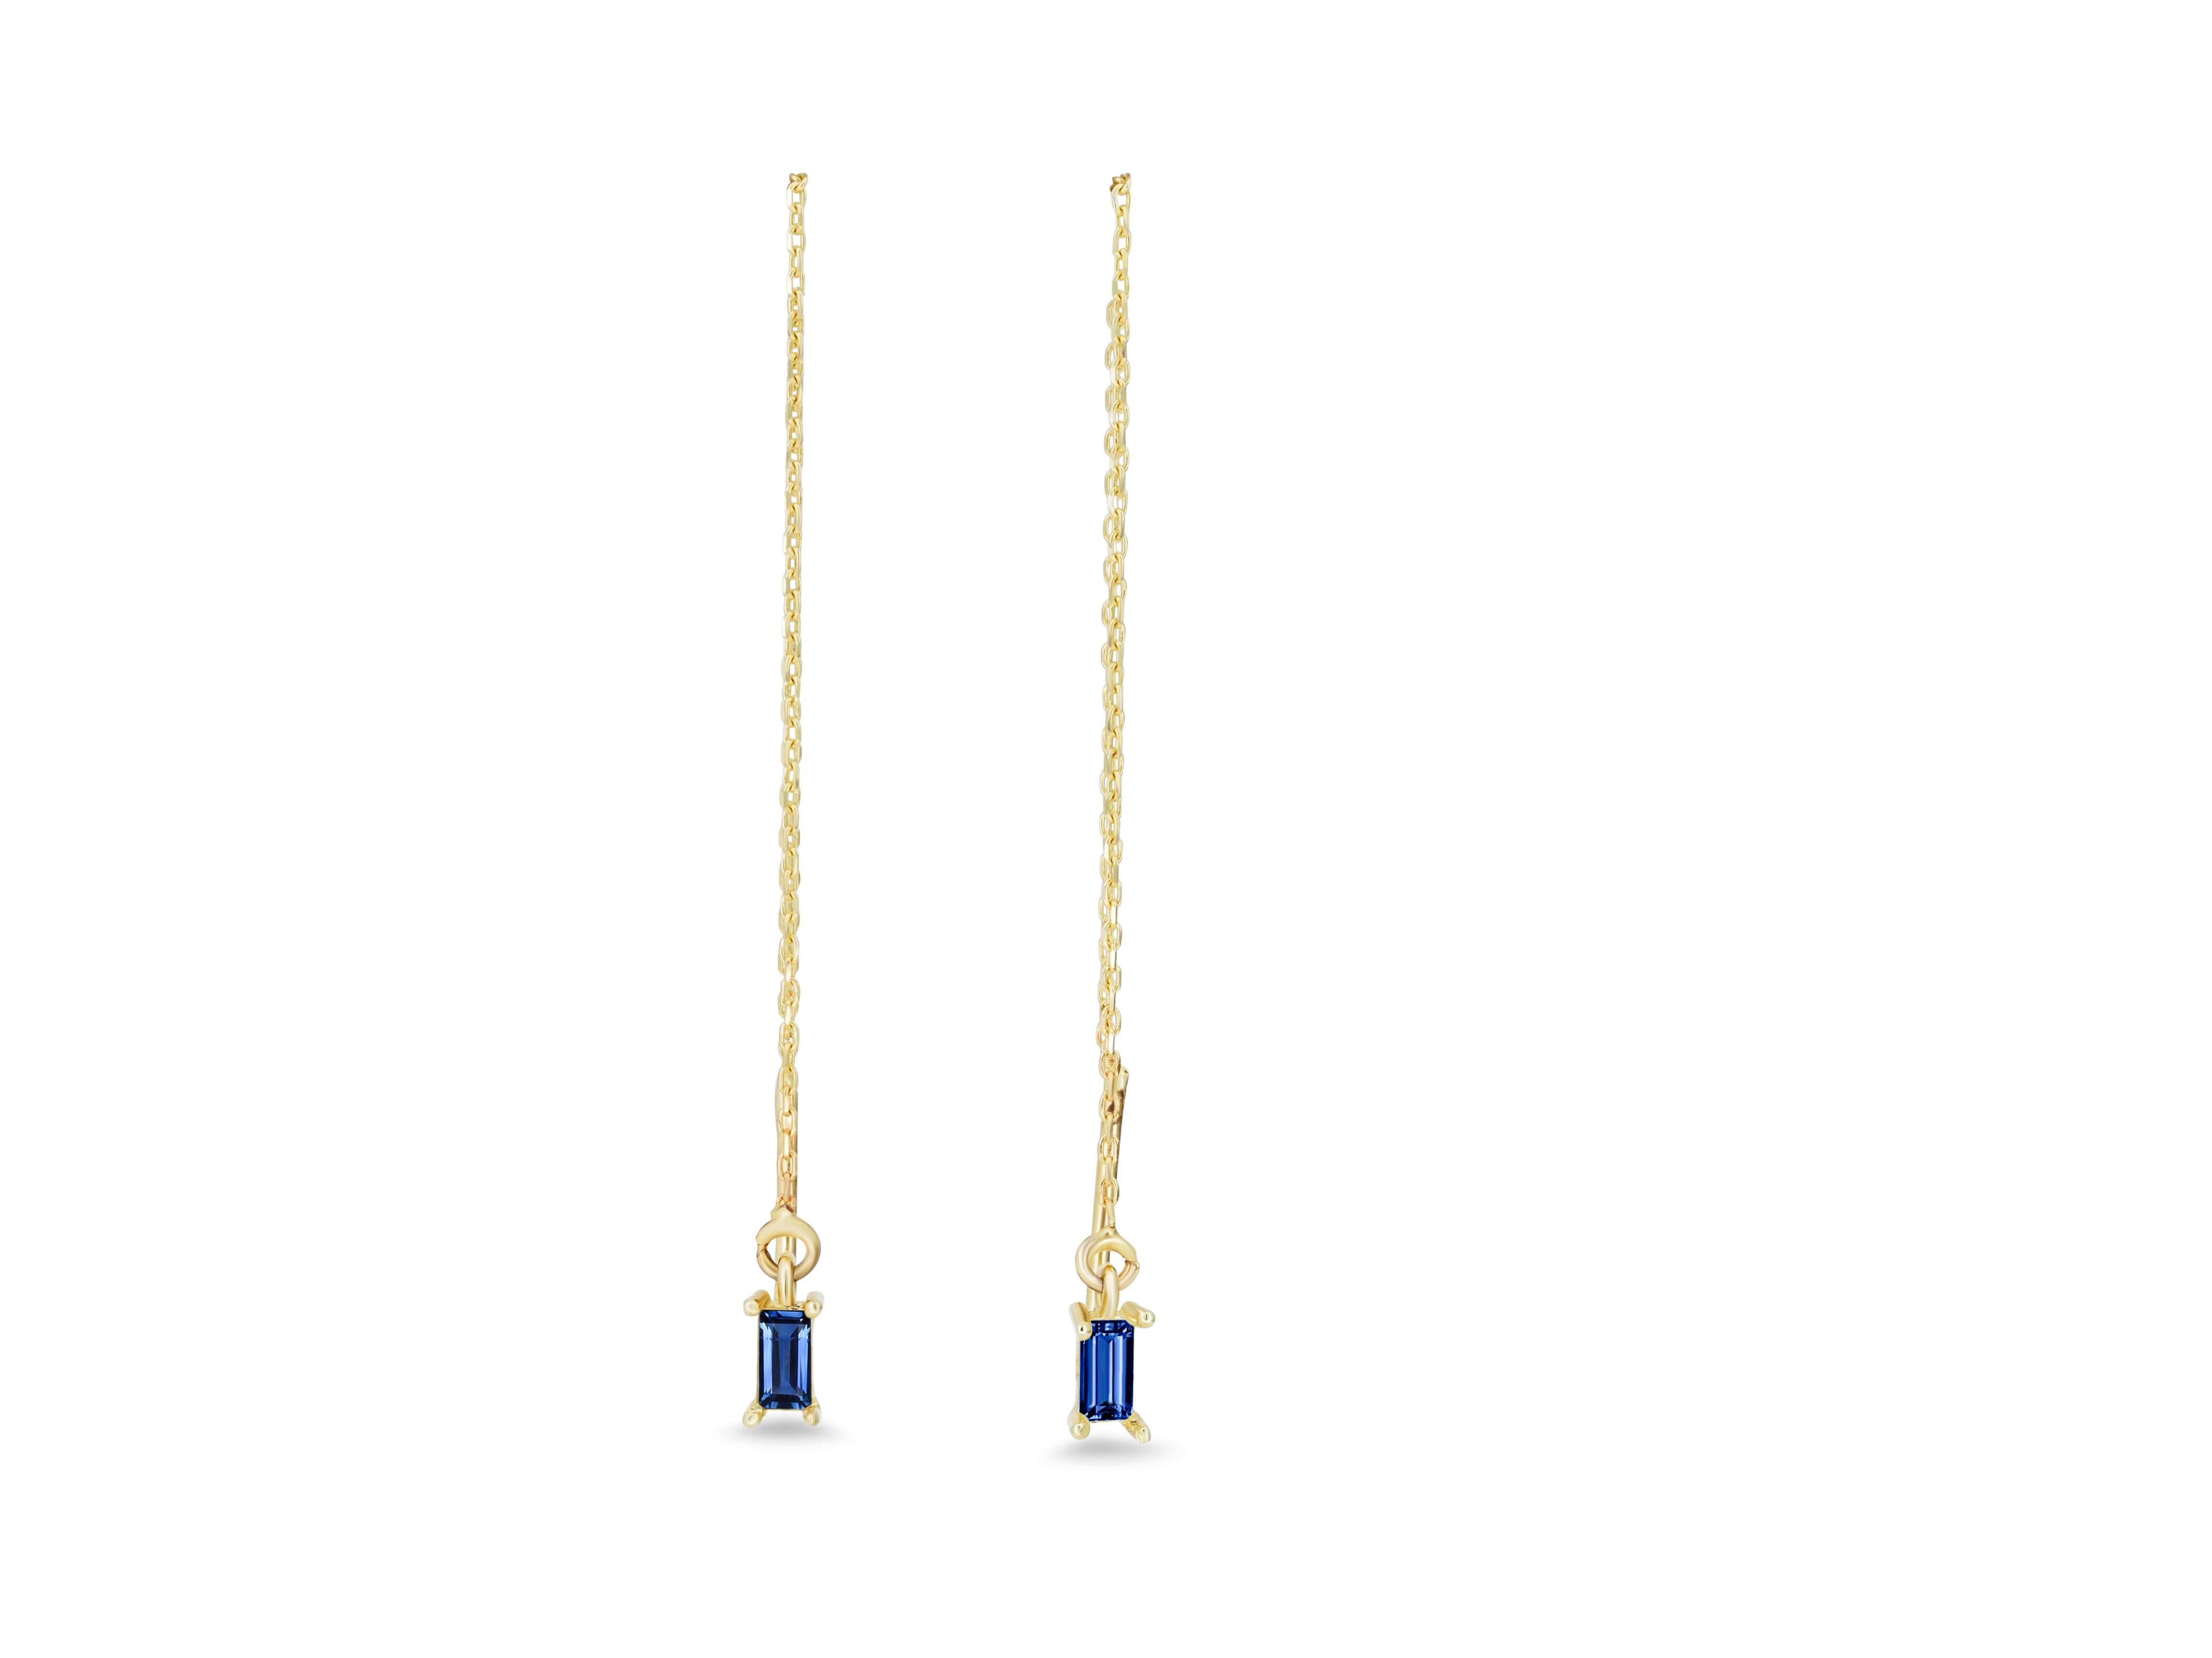 Baguette Cut 14k Solid Gold Drop Earrings with Blue Sapphire, Chain Gold Earrings For Sale